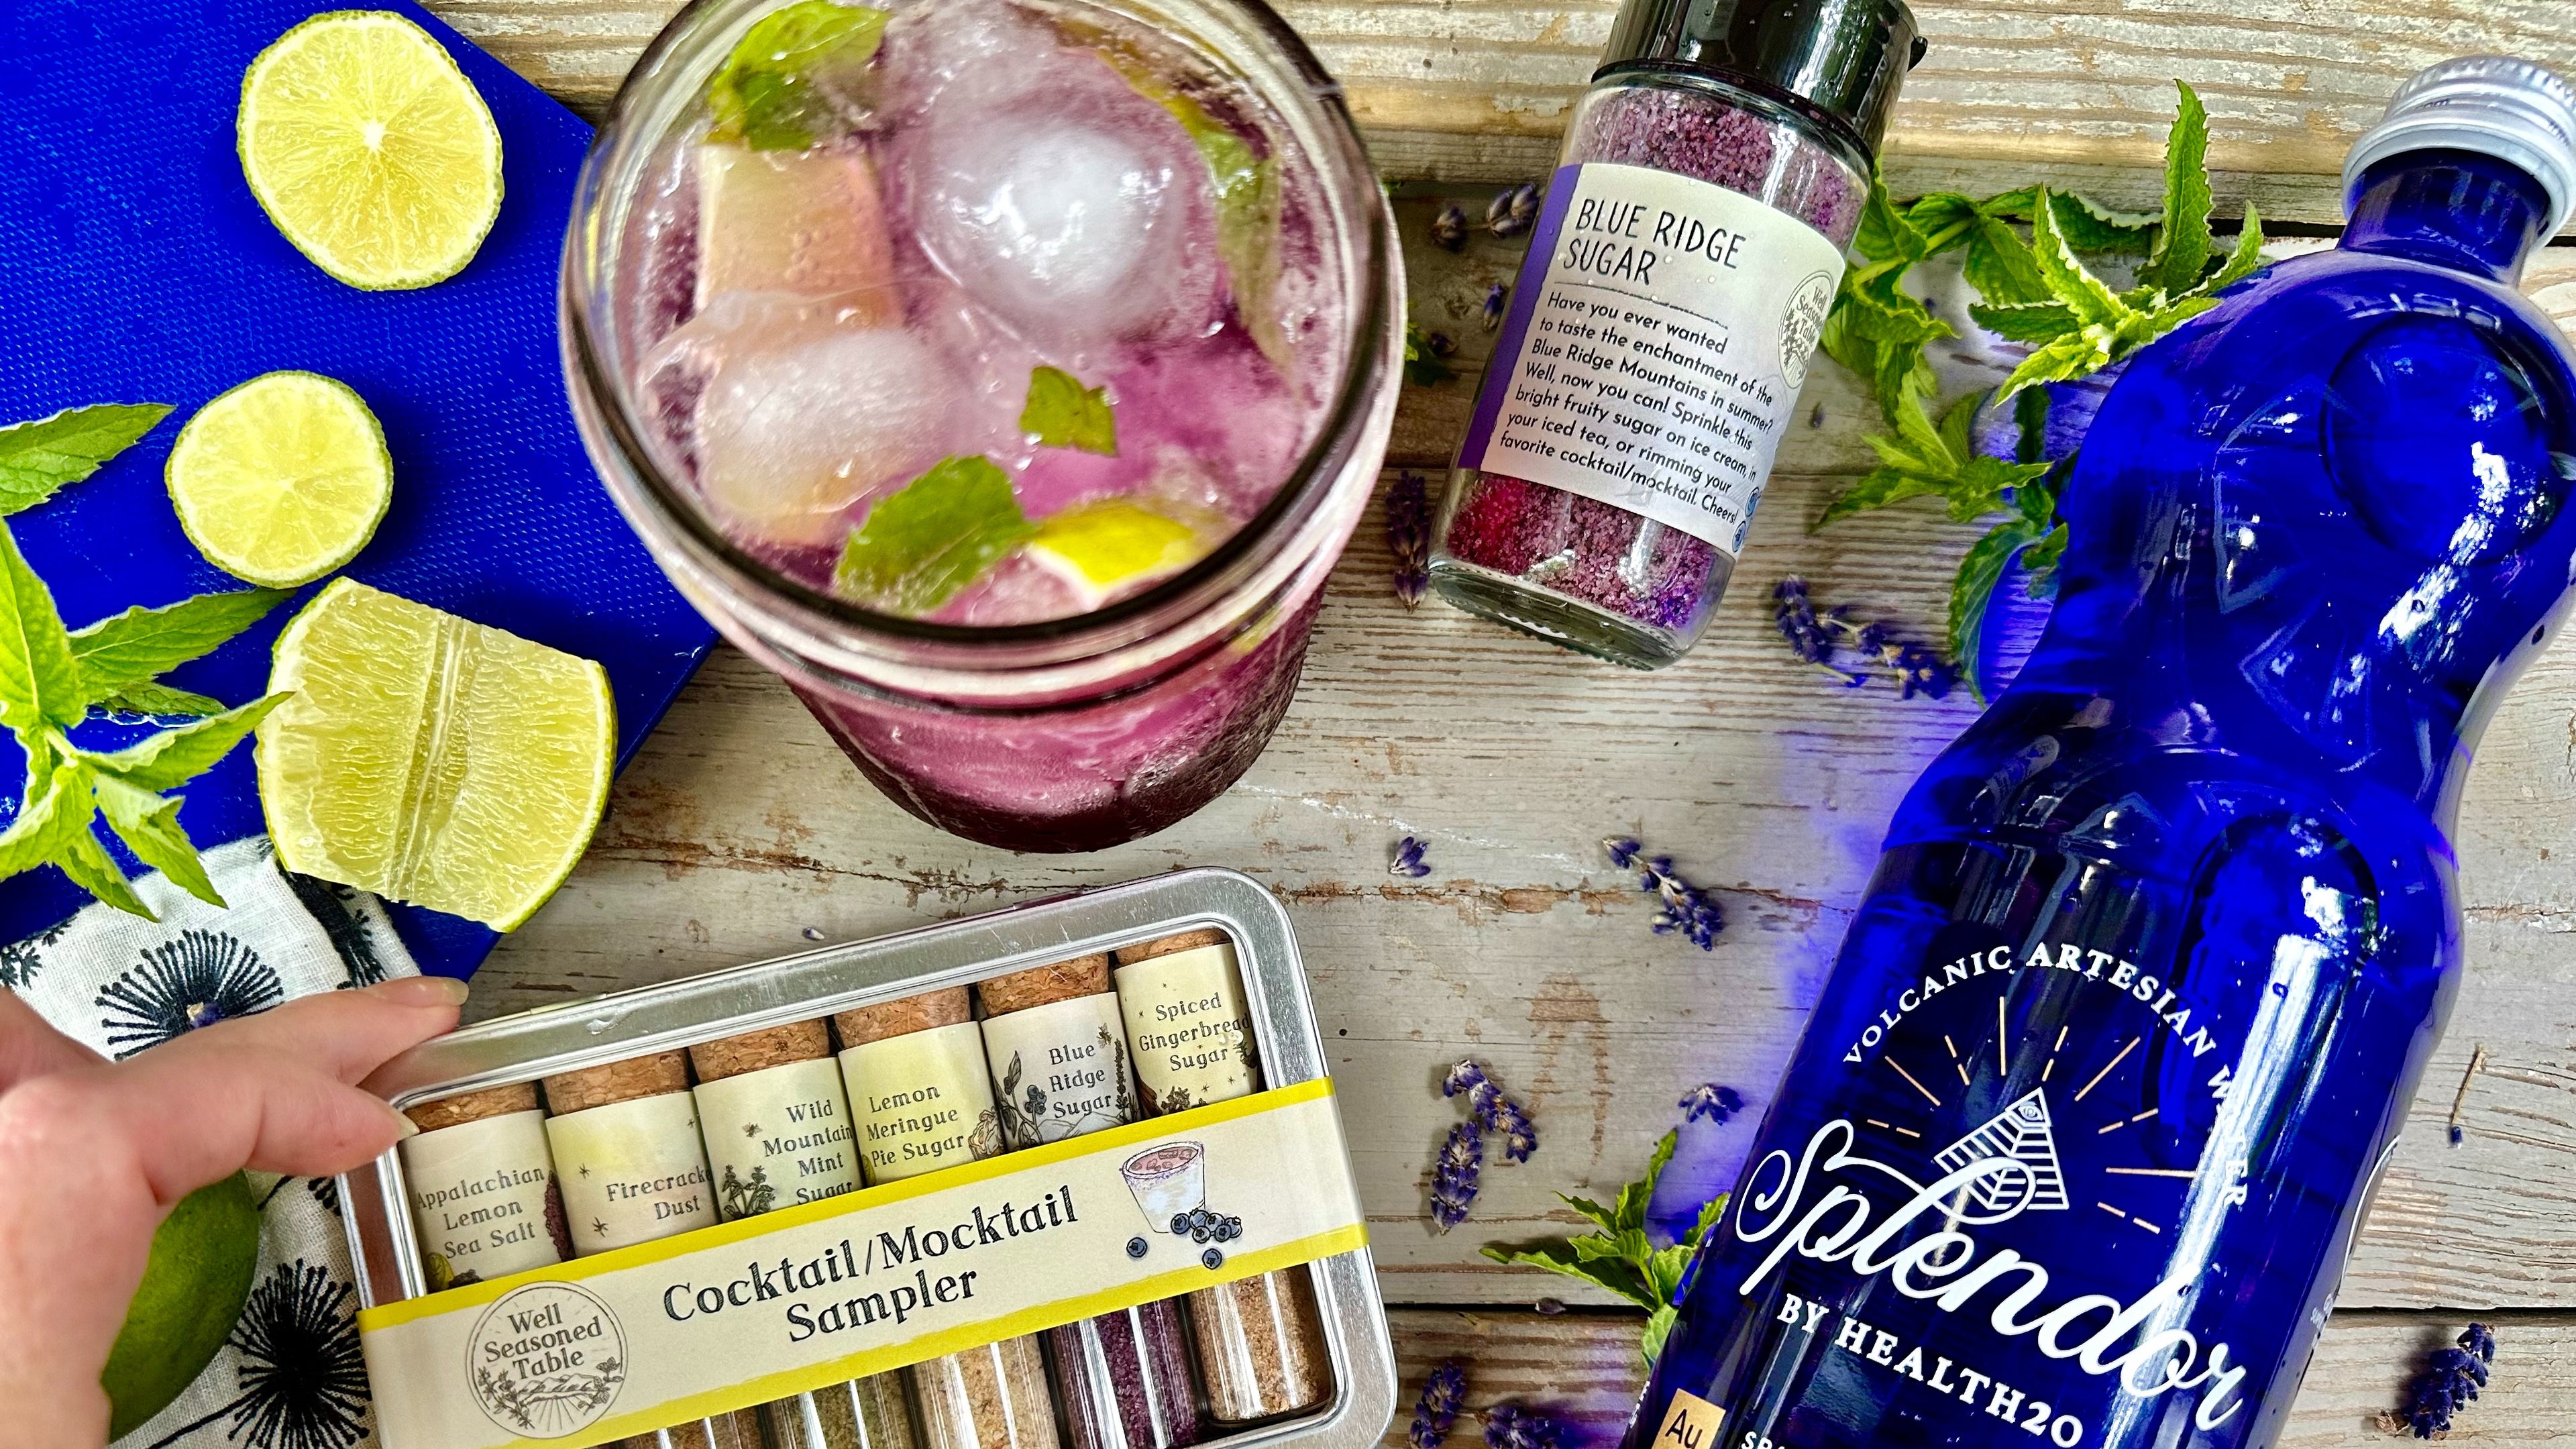 A blue bottle of Splendor sparkling water, a Cocktail/mocktail Sampler Tin, and a jar of Blue RIdge Sugar, from Well Seasoned Table with a purple cocktail, lime wedges, and mint leaves.